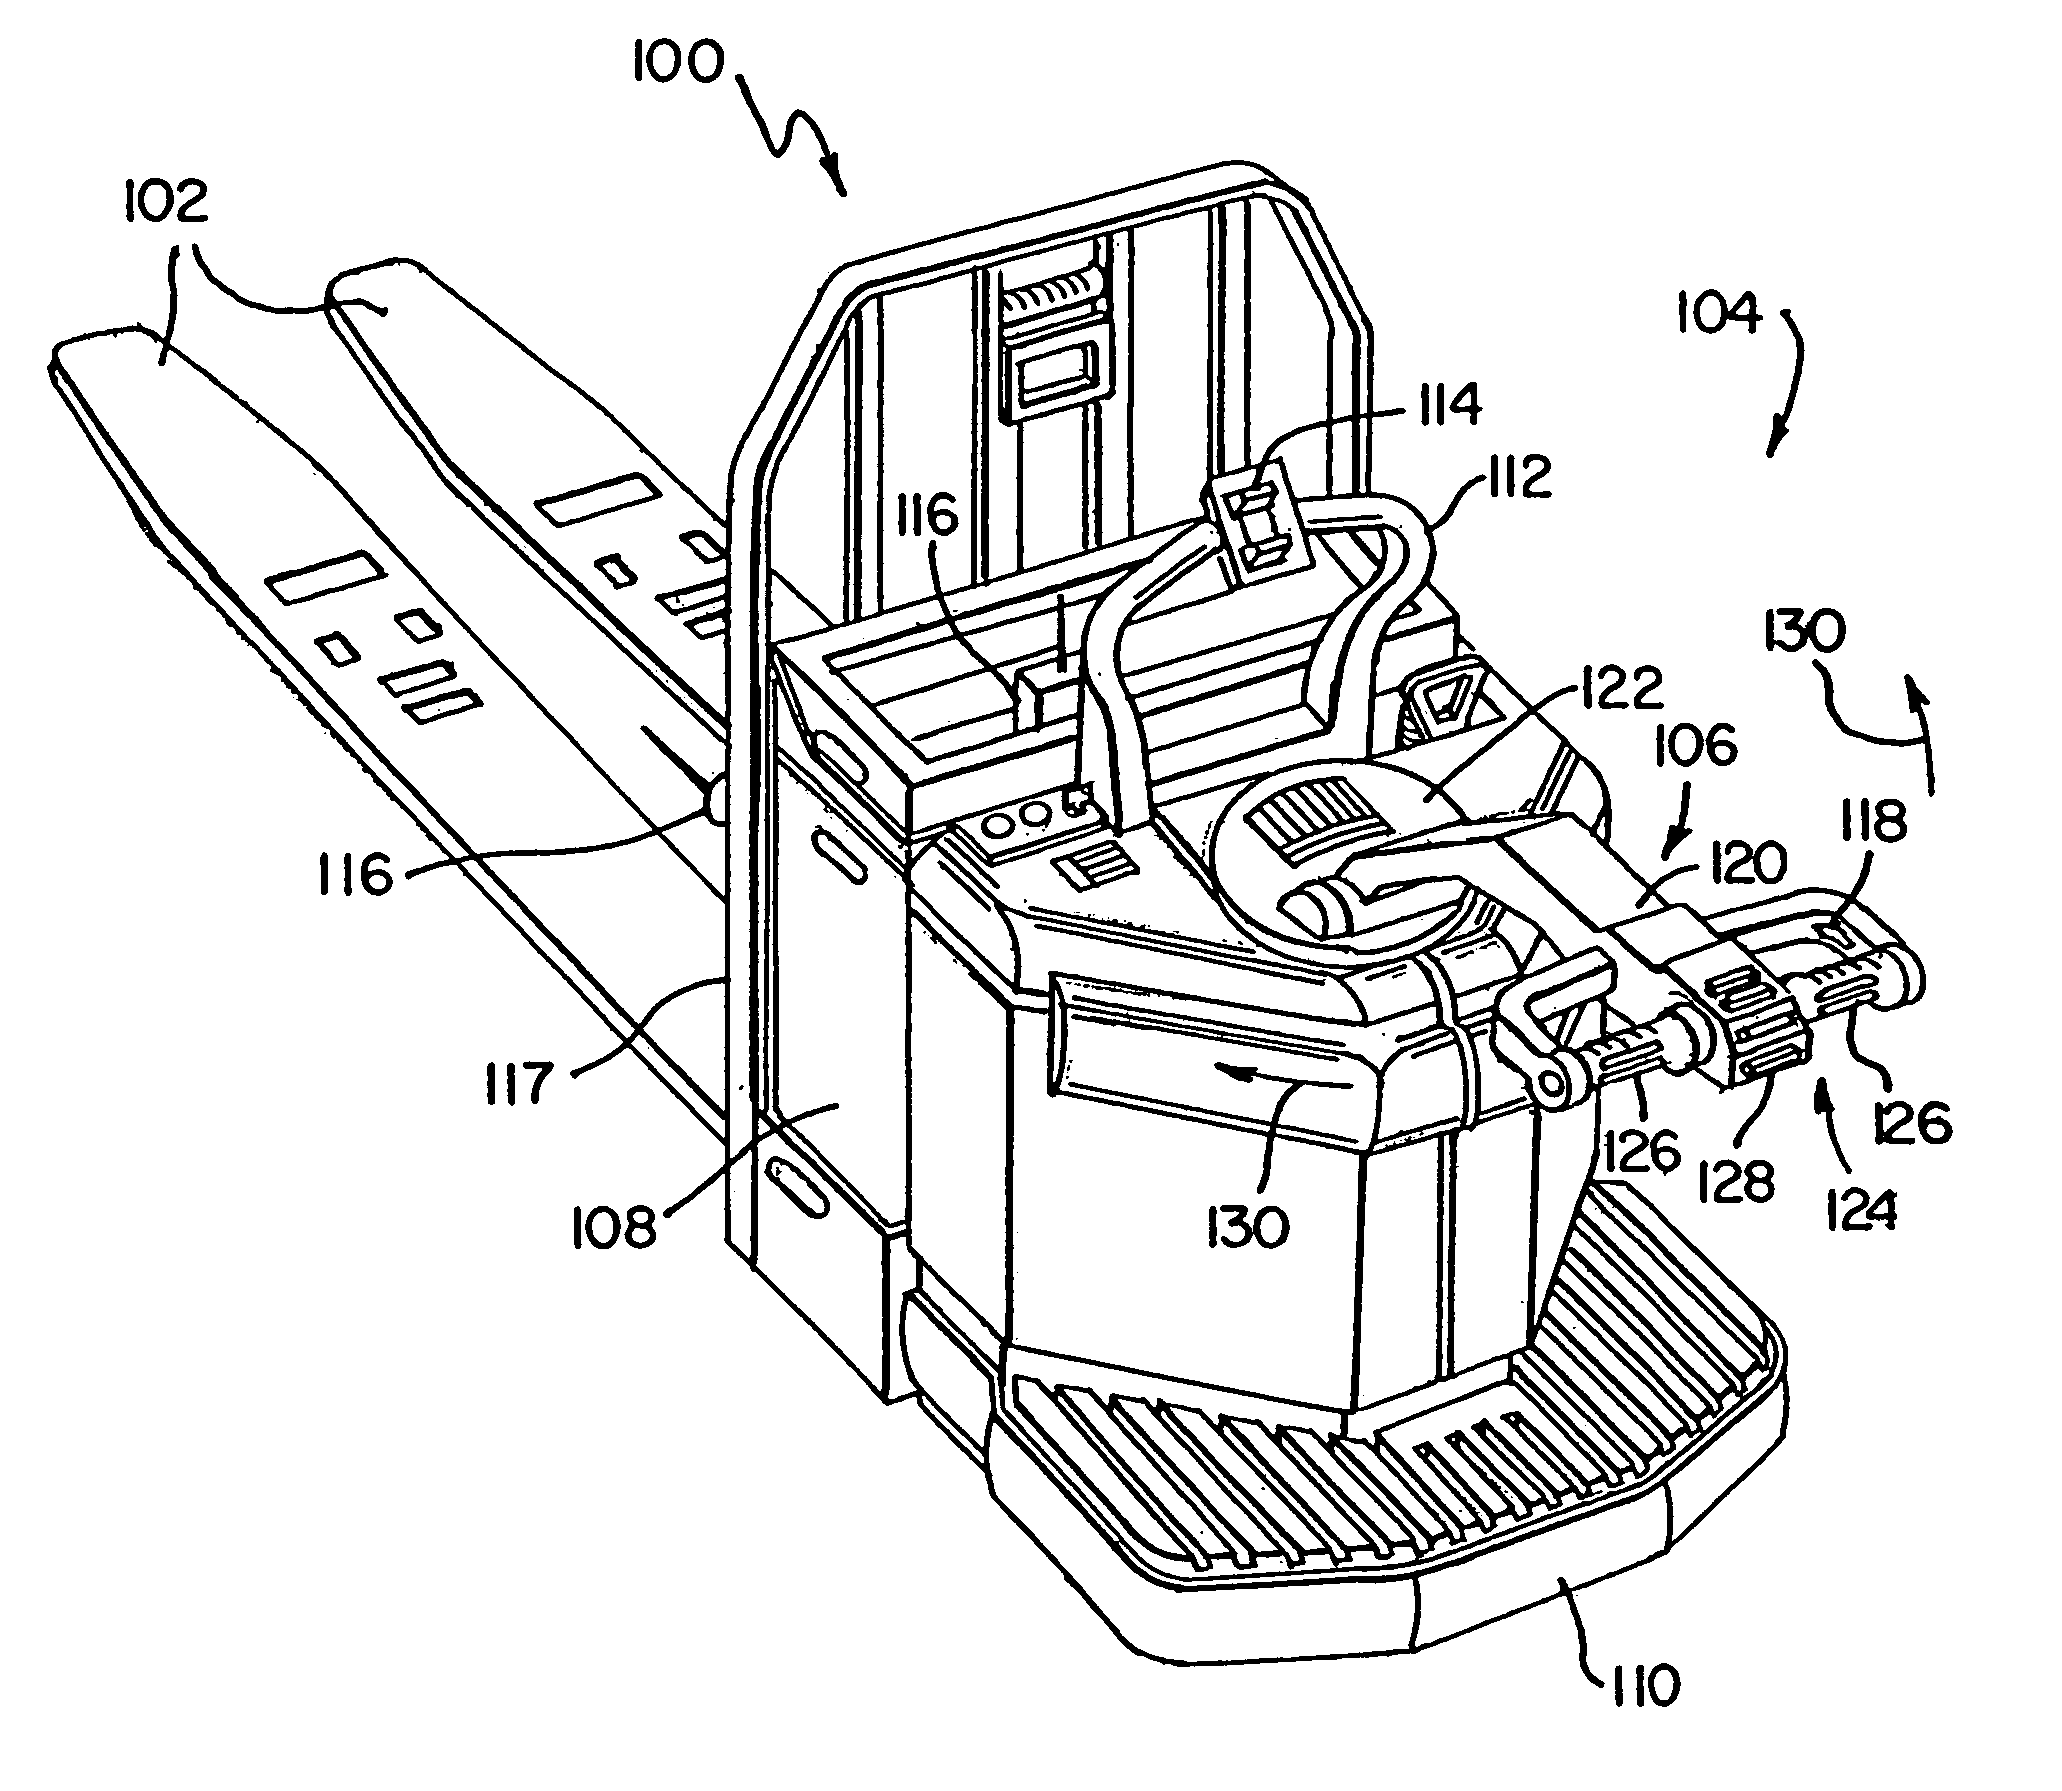 Electrical steering assist for material handling vehicles